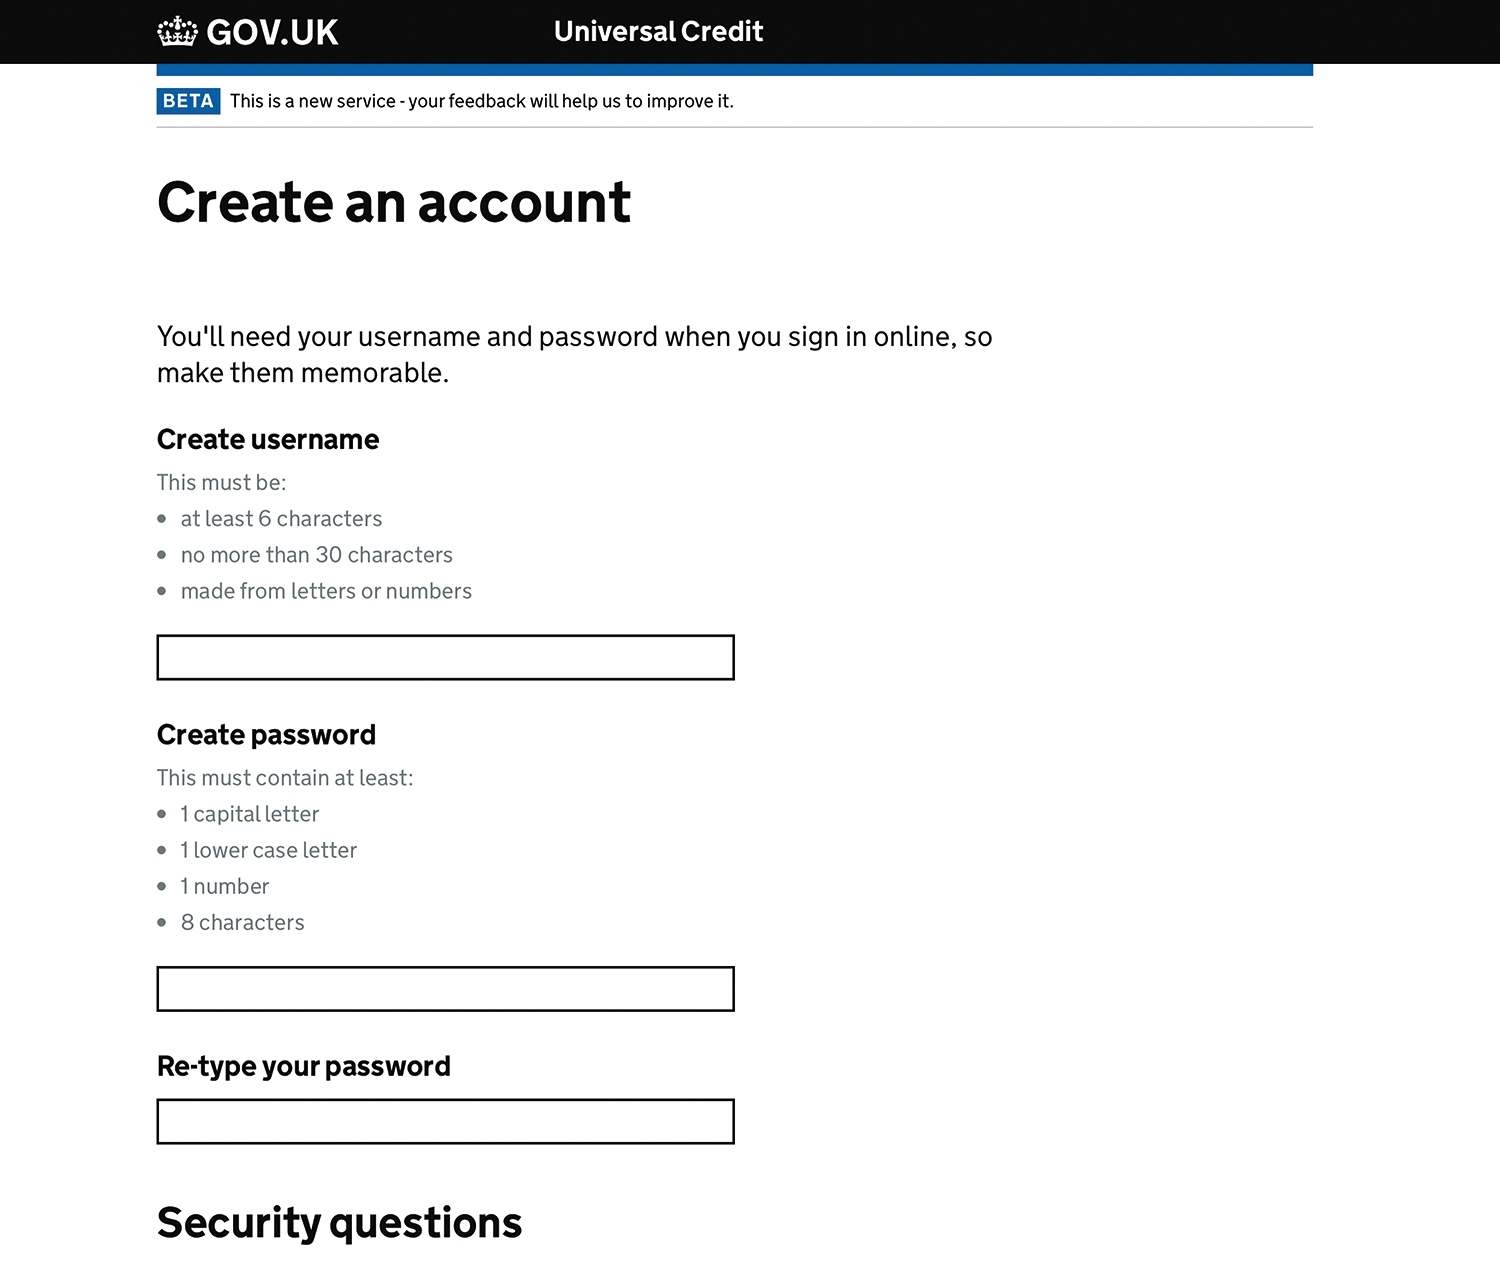 Universal Credit - Create an account 